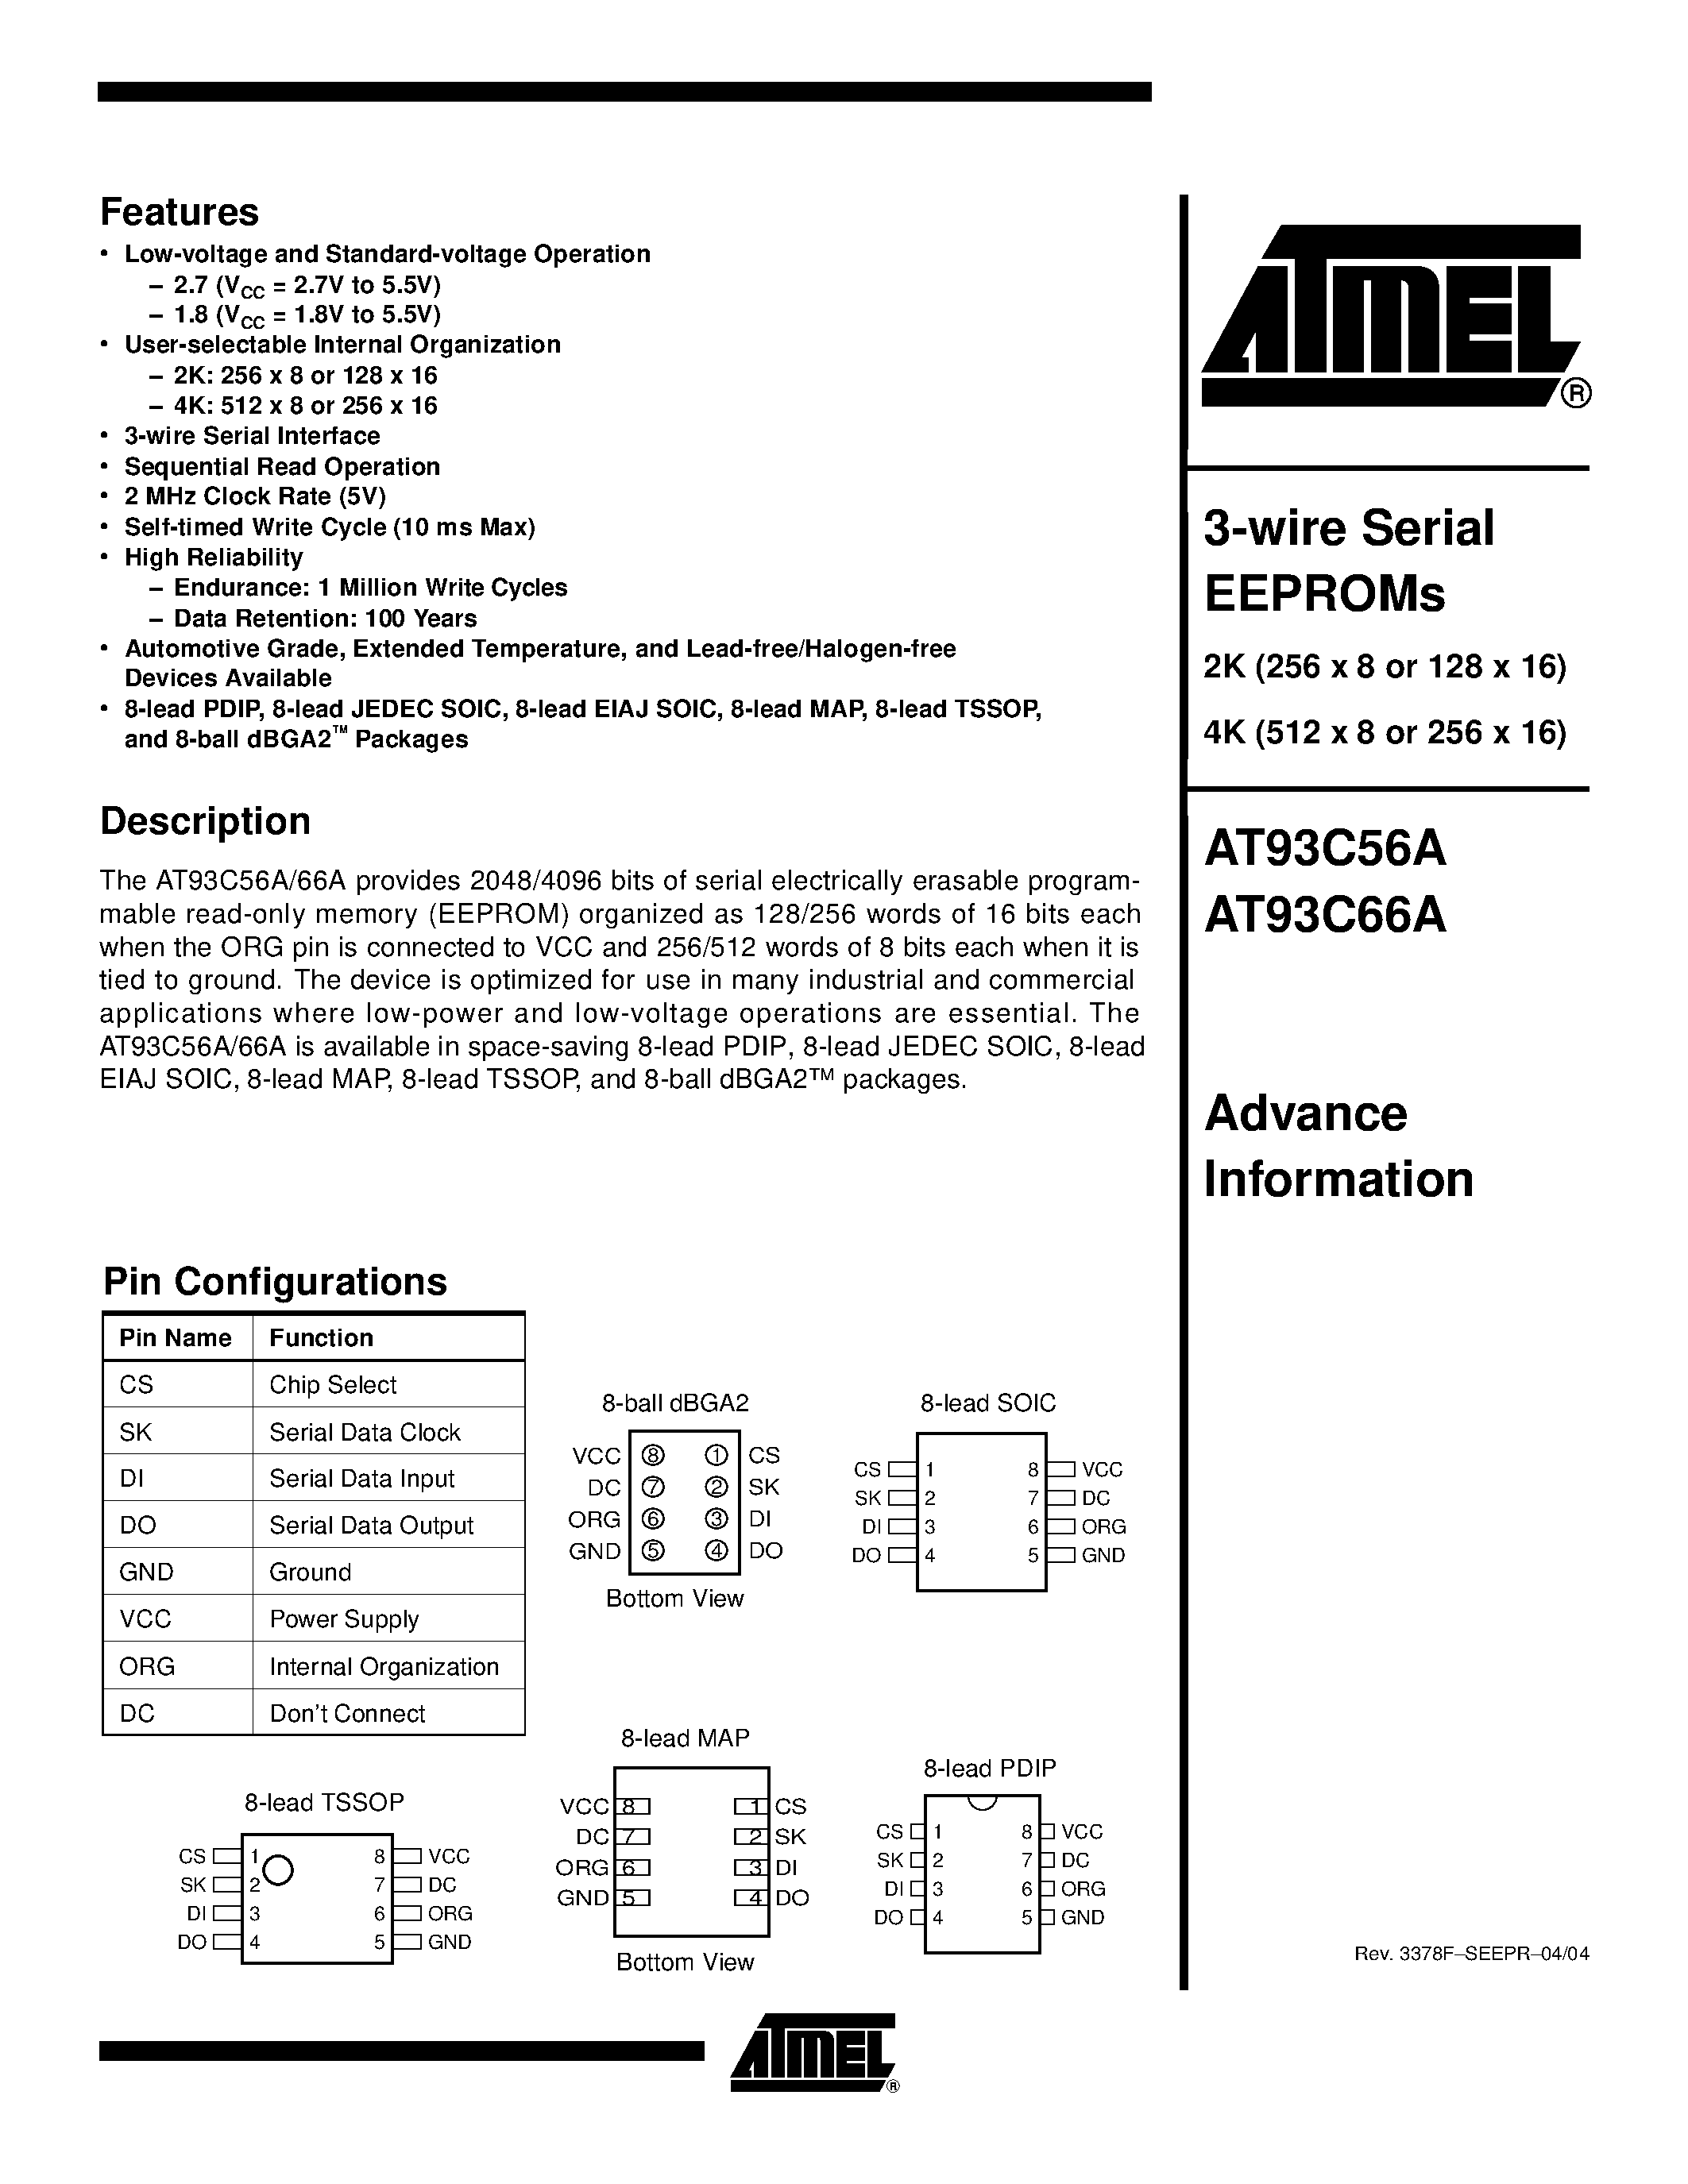 Datasheet AT93C56AY1-10YI-1.8 - 3-wire Serial EEPROMs 2K (256 x 8 or 128 x 16) page 1